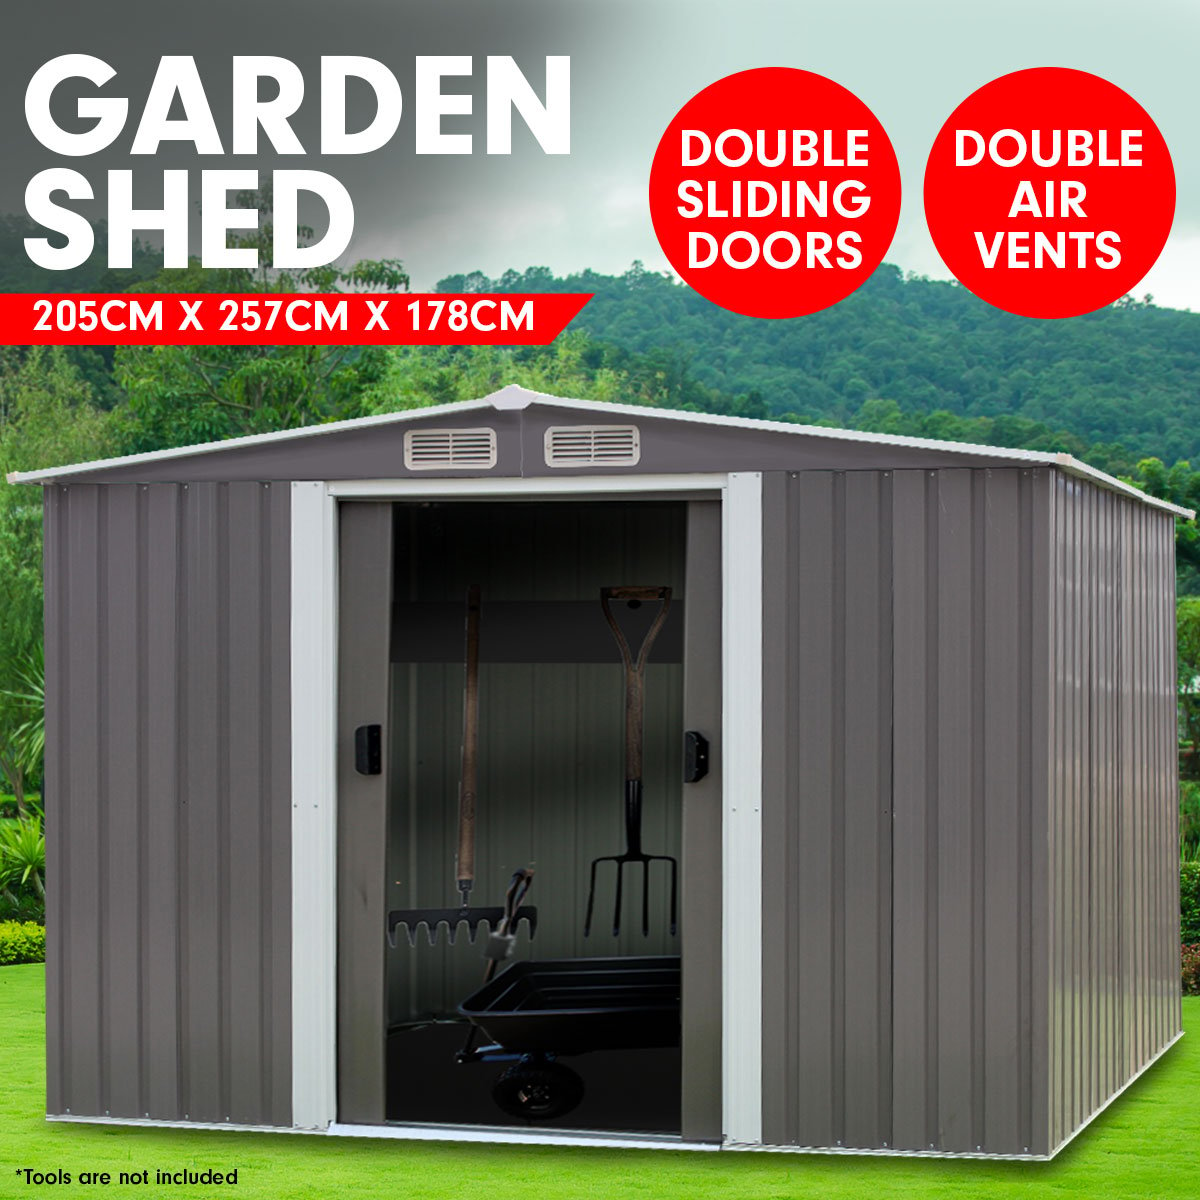 Garden Shed Spire Roof 6ft x 8ft Outdoor Storage Shelter - Grey 2